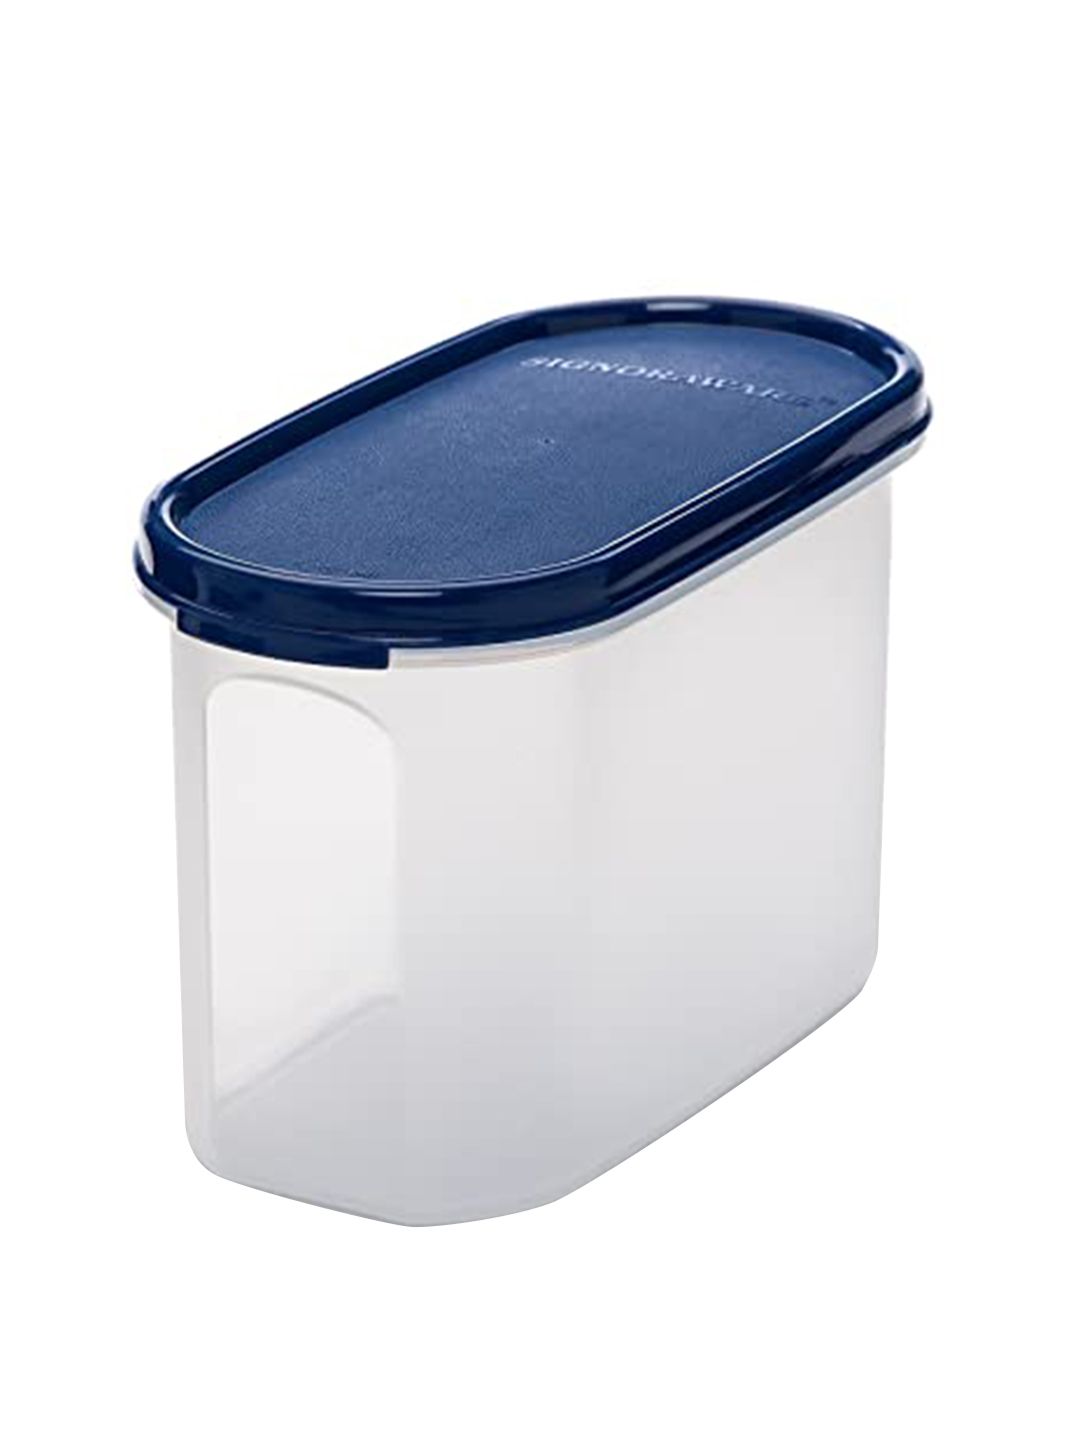 SignoraWare Set Of 3 Blue Solid Storage Containers Price in India